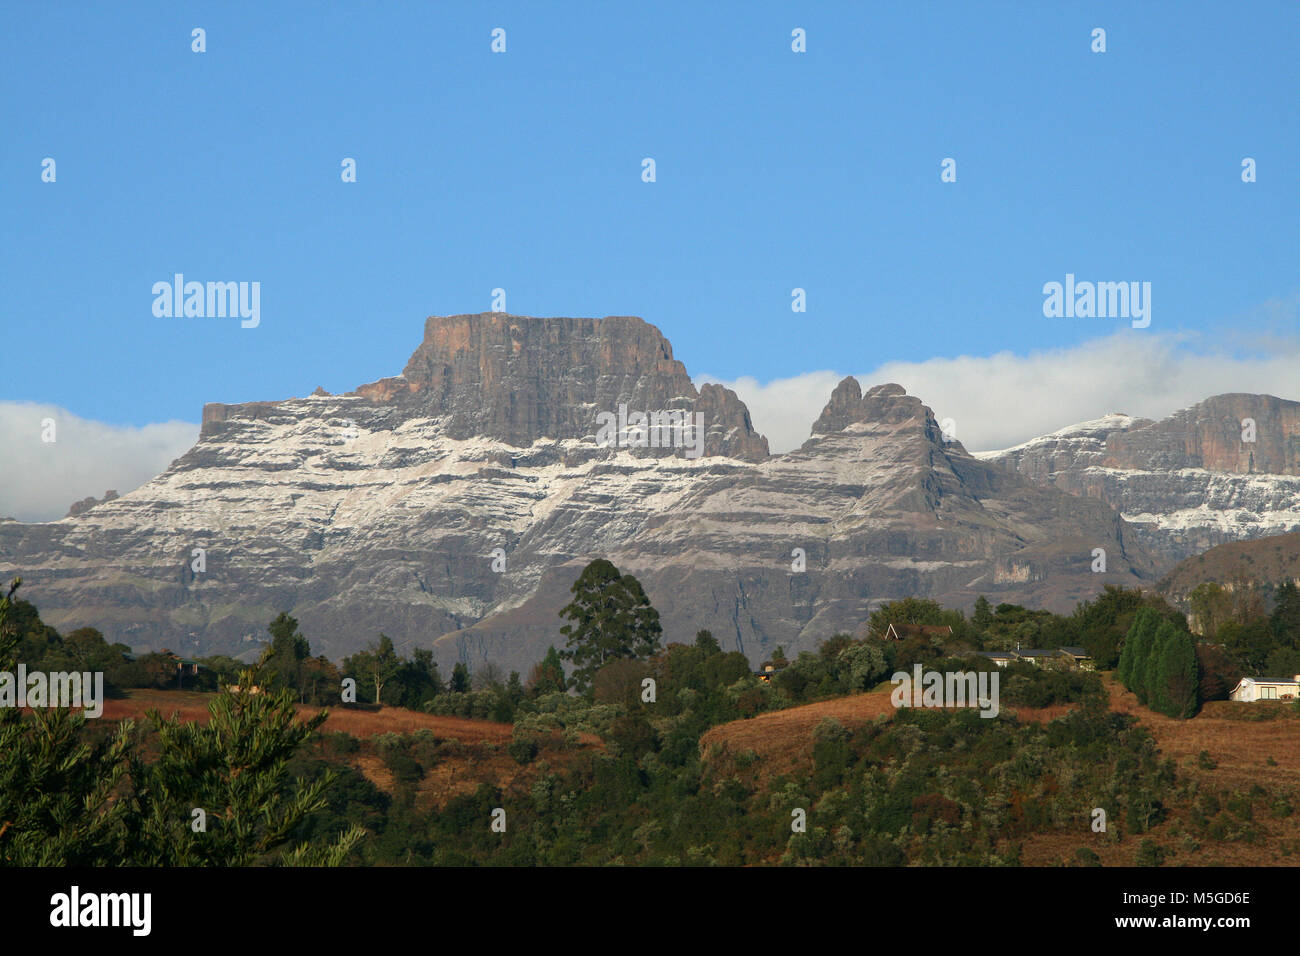 Drakensberg Mountains with snow, South Africa Stock Photo